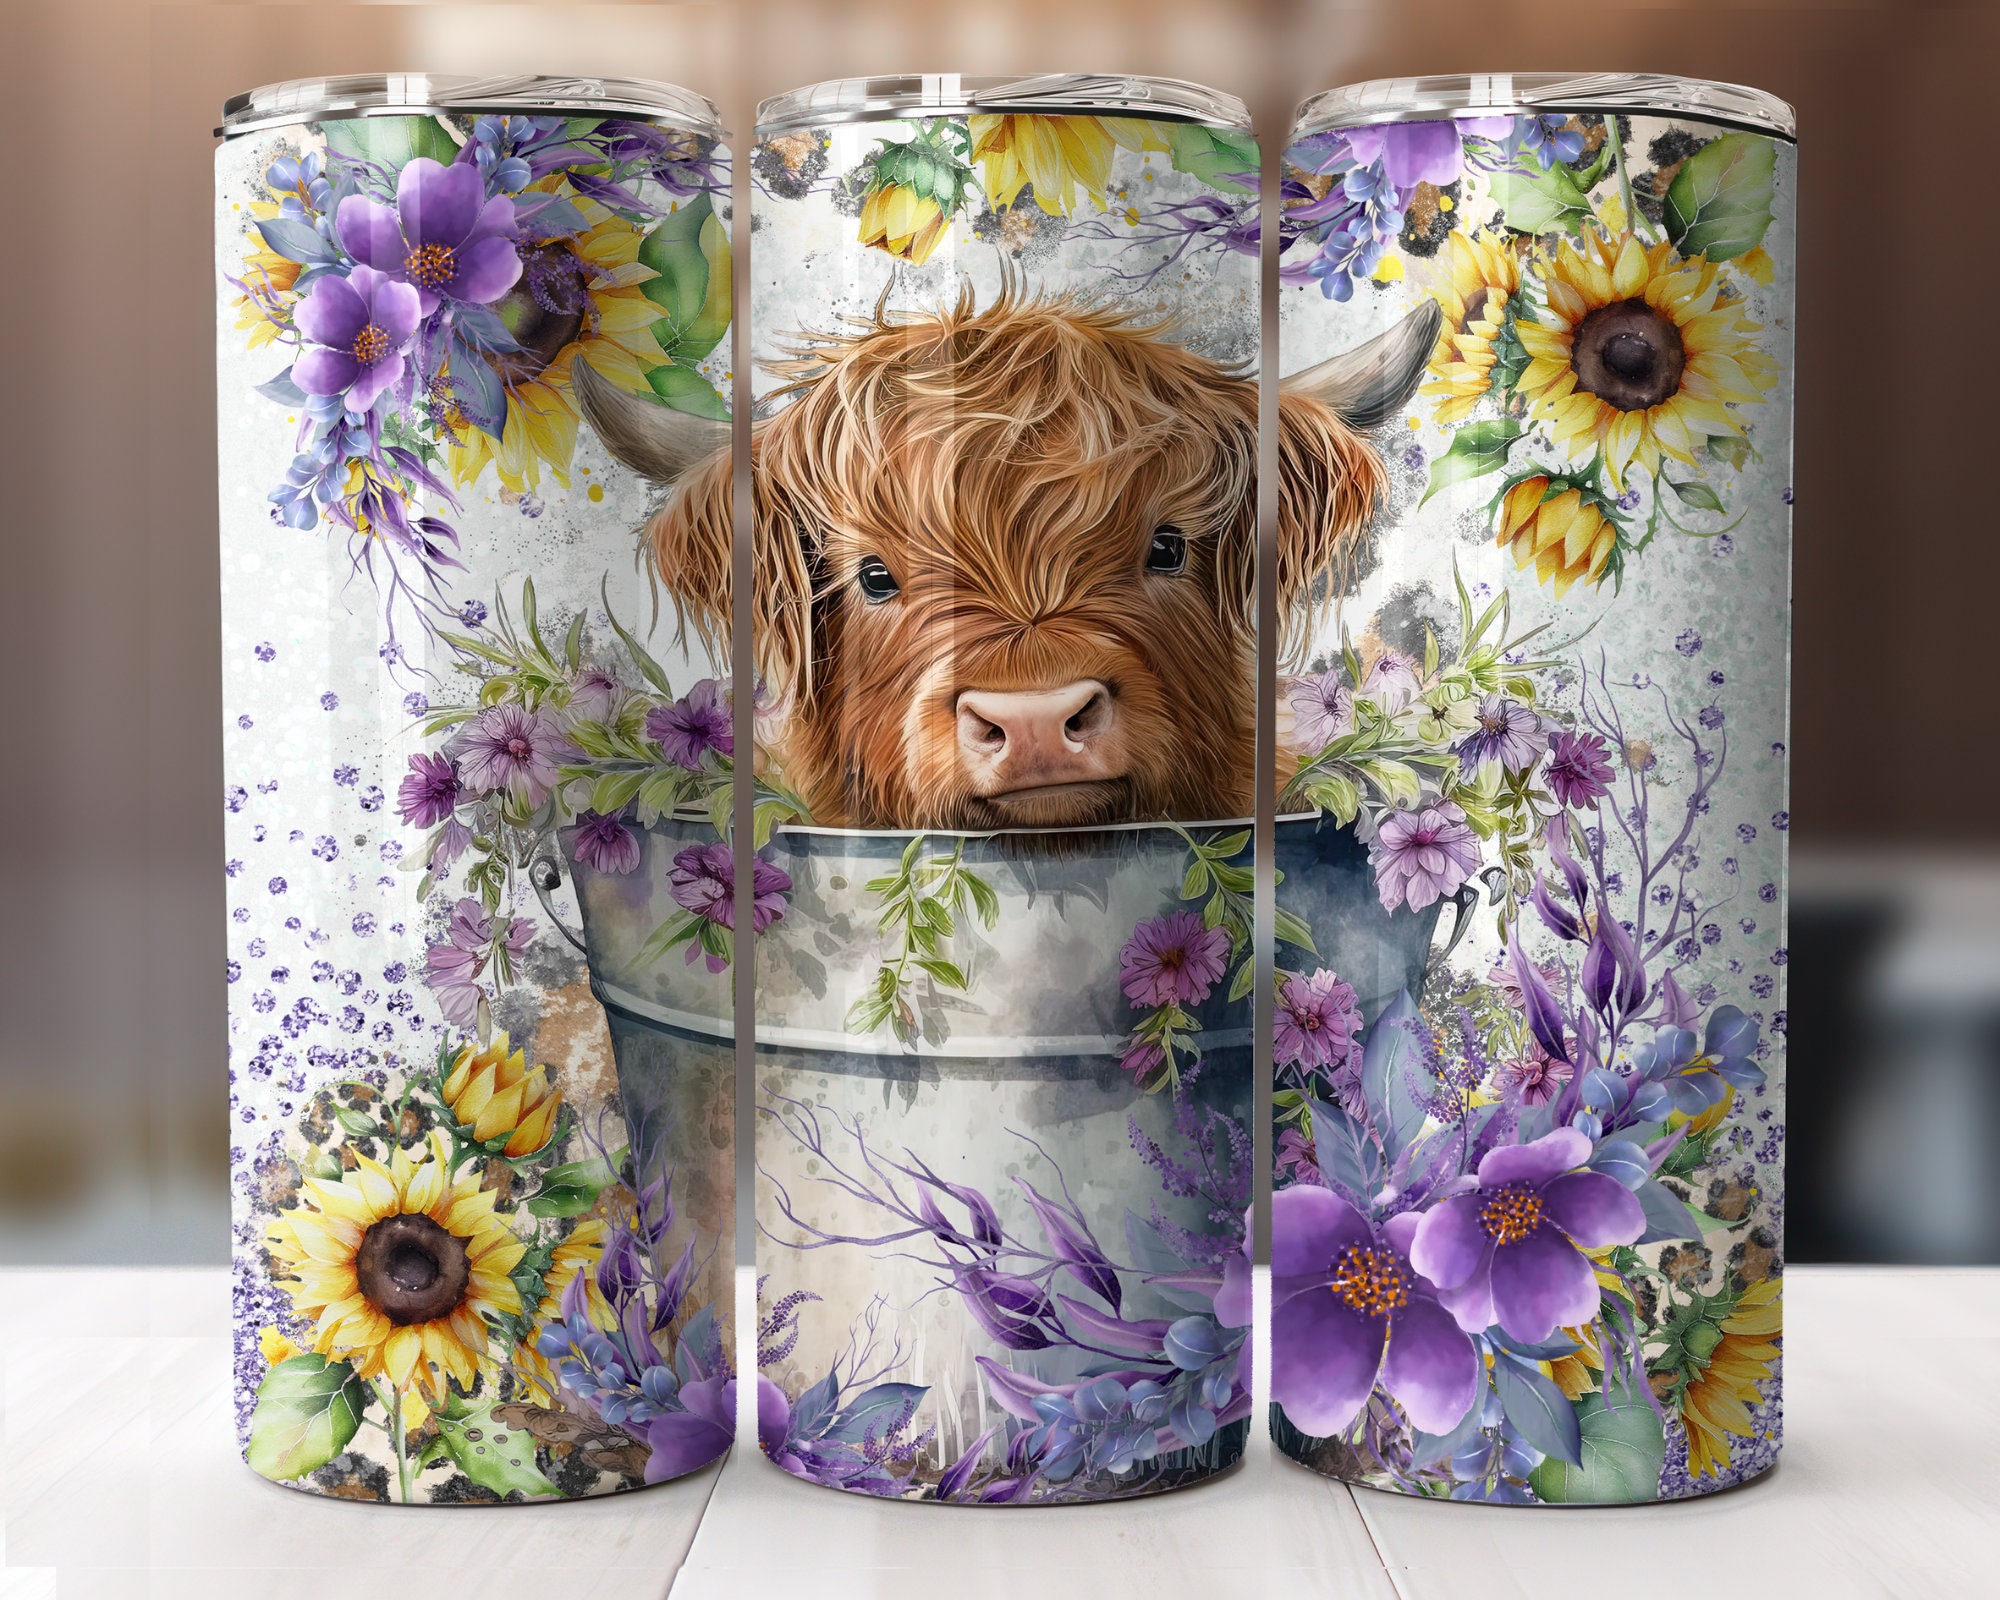 Highland Cows 40oz Tumbler With Handle Sleeve – Drink Handlers